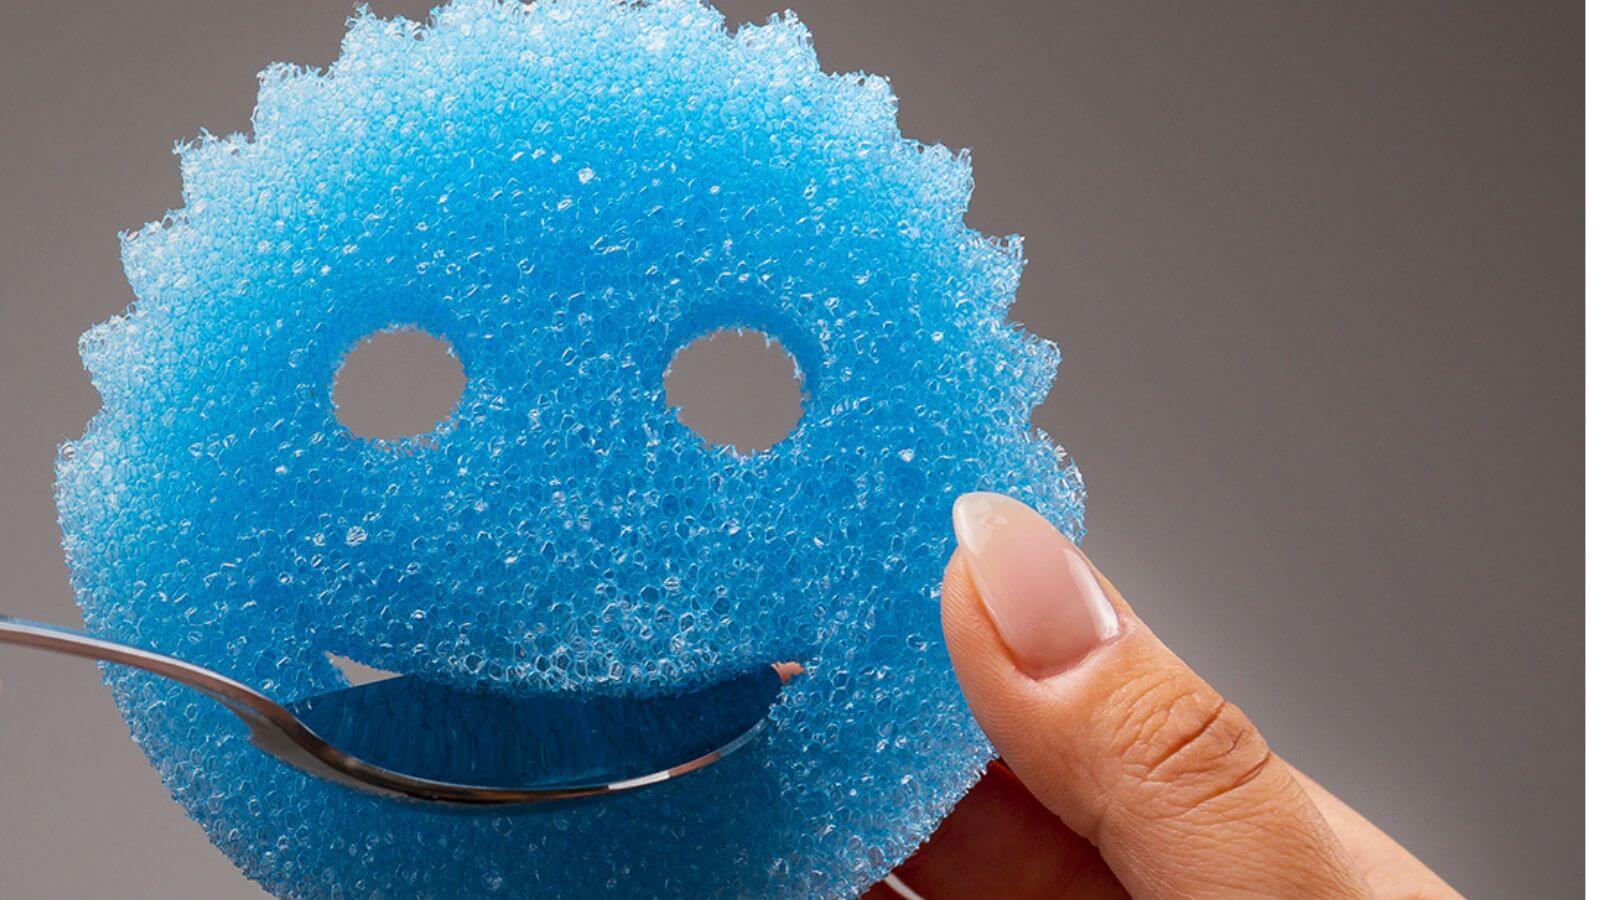 Scrub Daddy's mouth is so very useful.